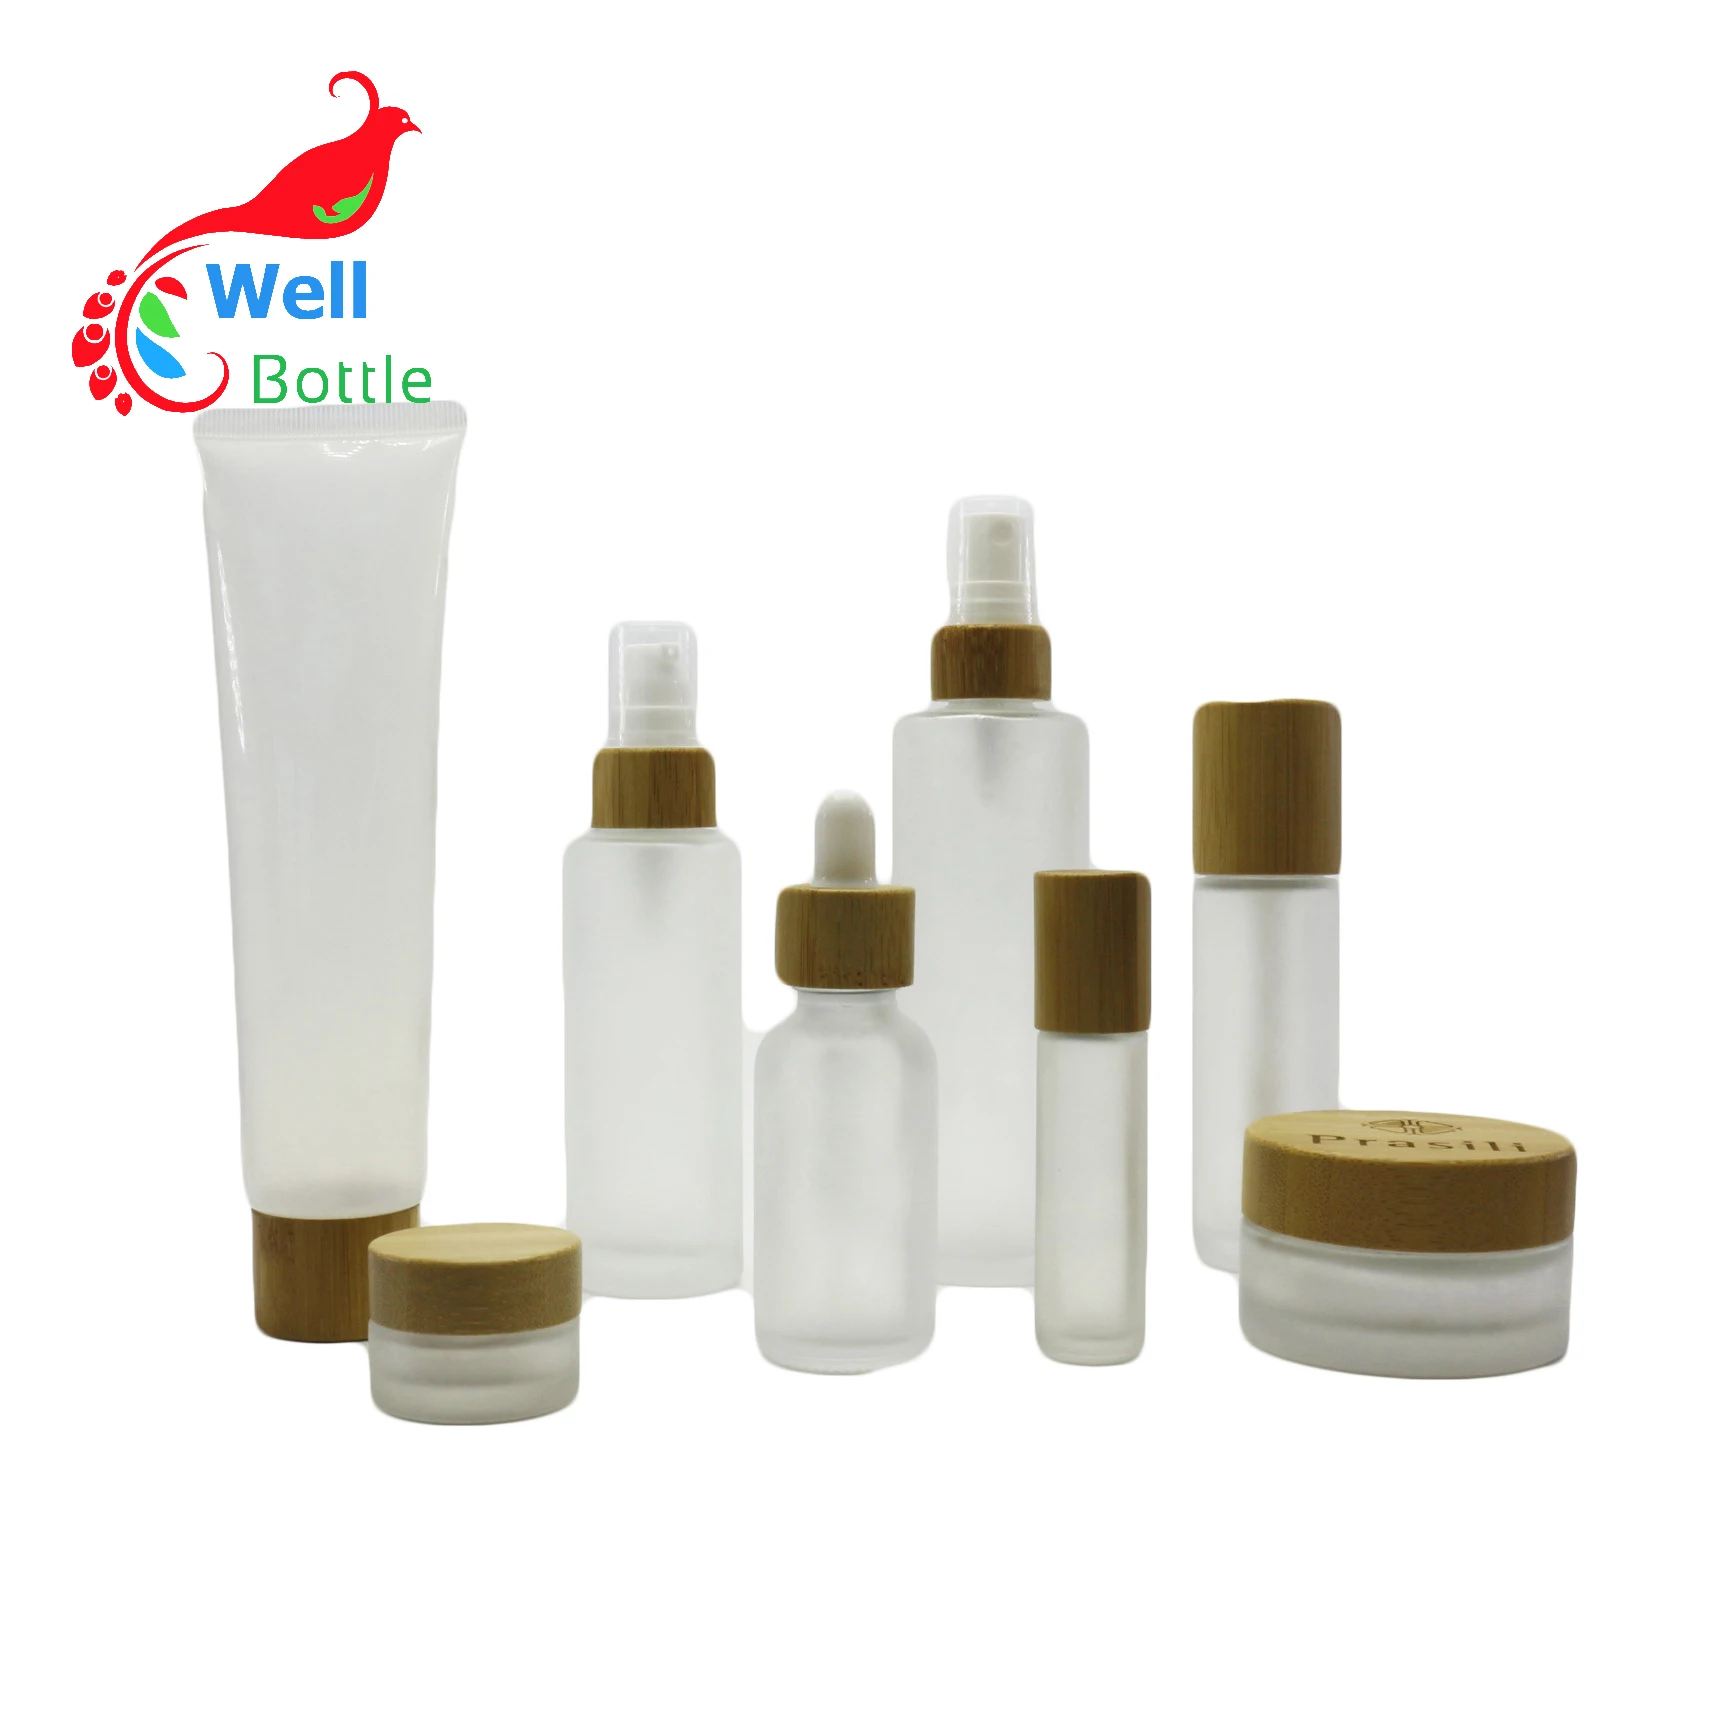 Download Bamboo Cosmetic Packaging Toner Lotions Serum 50ml 100ml 120ml 150ml Frosted Glass Cosmetic Bottle With Bamboo Lid Bp419e Buy Serum Frosted Glass Bottle Toner Bamboo Bottle Glass Toner Bottle Product On Alibaba Com